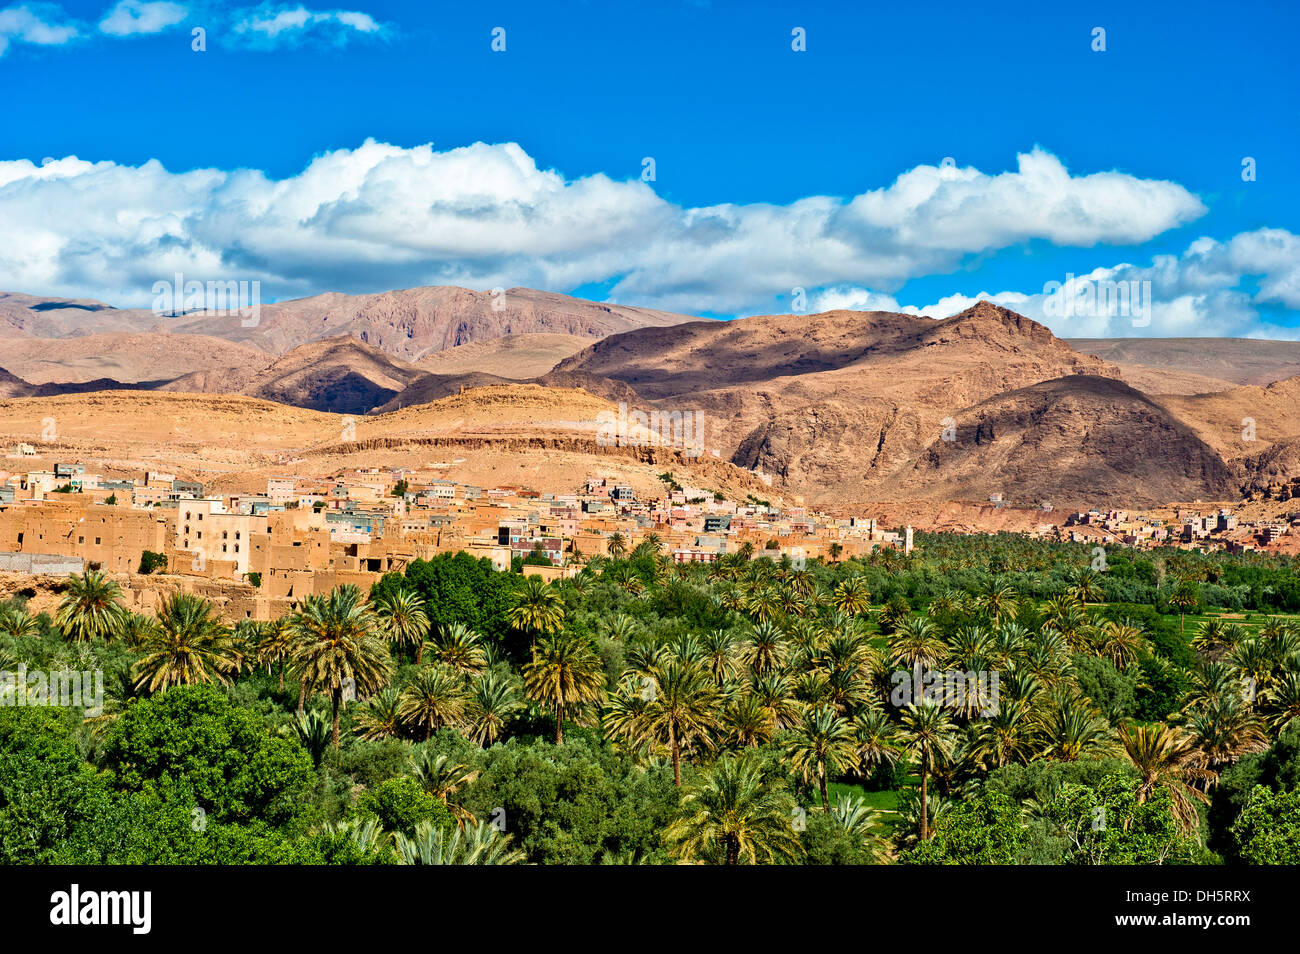 Landscape with an oasis, date palms and fruit trees, a village of mud-walled houses at the back, Ksar or Ksour Stock Photo